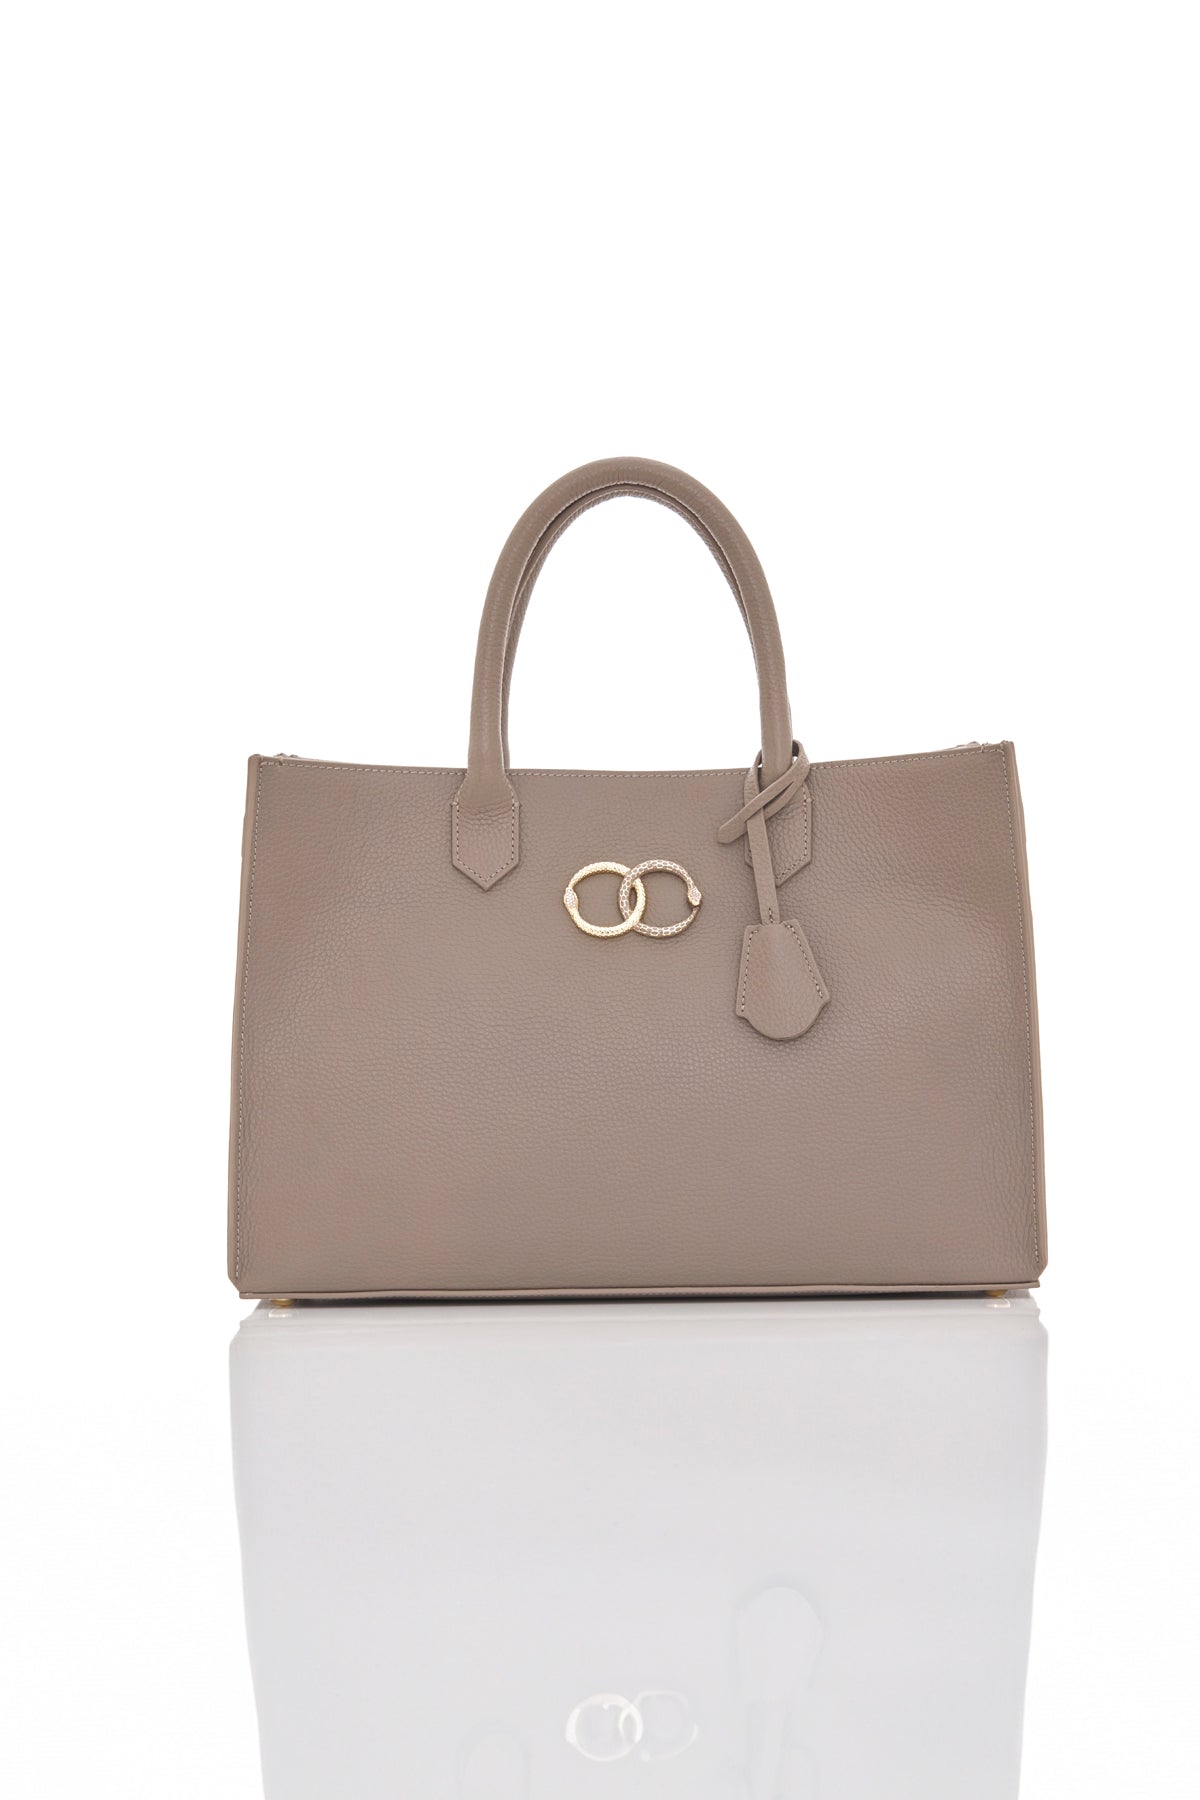 taupe ouroboros genuine leather women's tote bag front